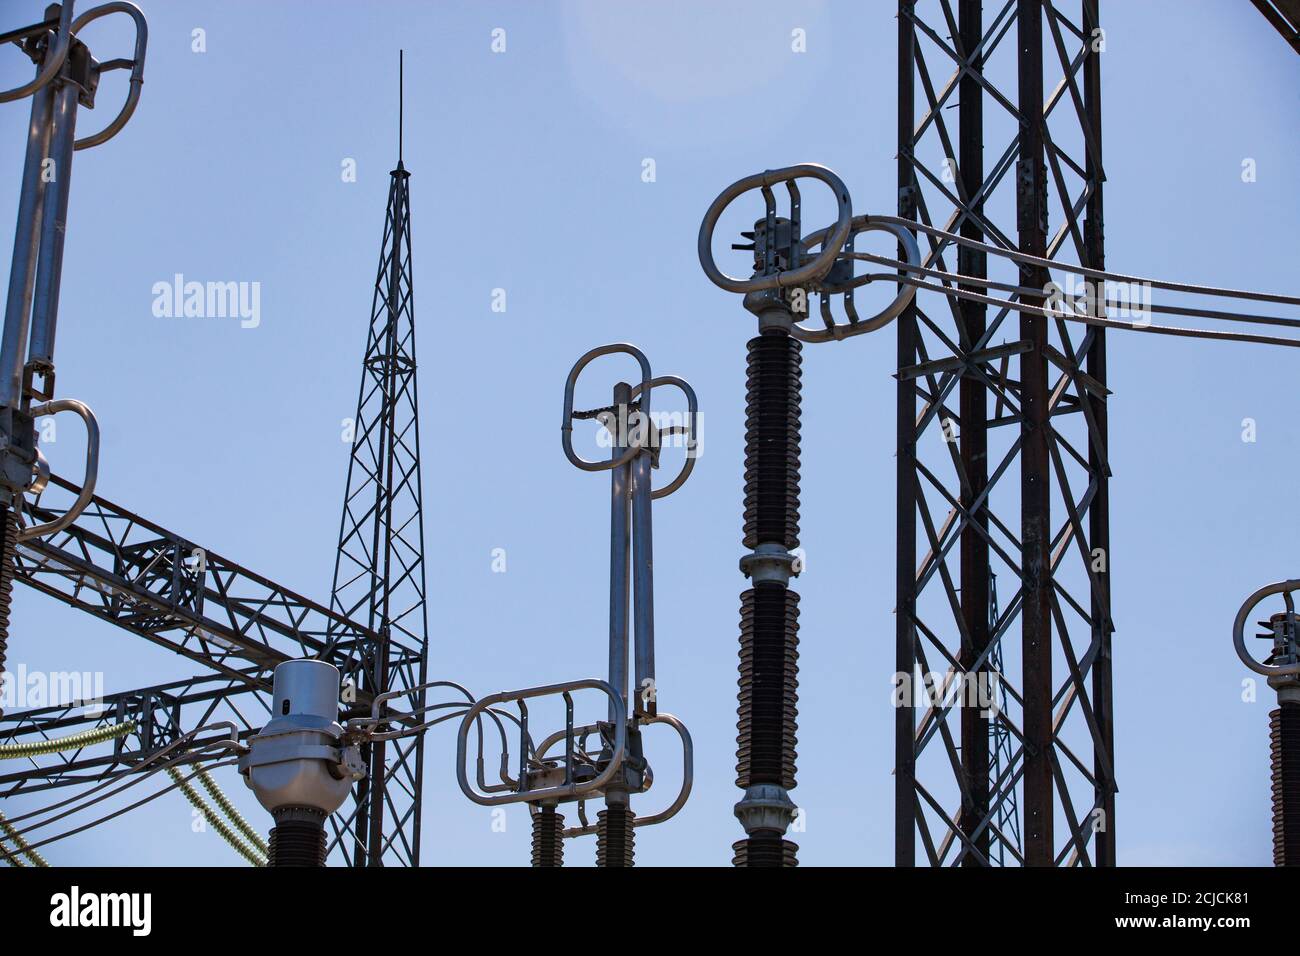 Electric power station. Transformer station (electrical substation). Silhouette of pylons, girders, insulators and wires on blue sky. Stock Photo